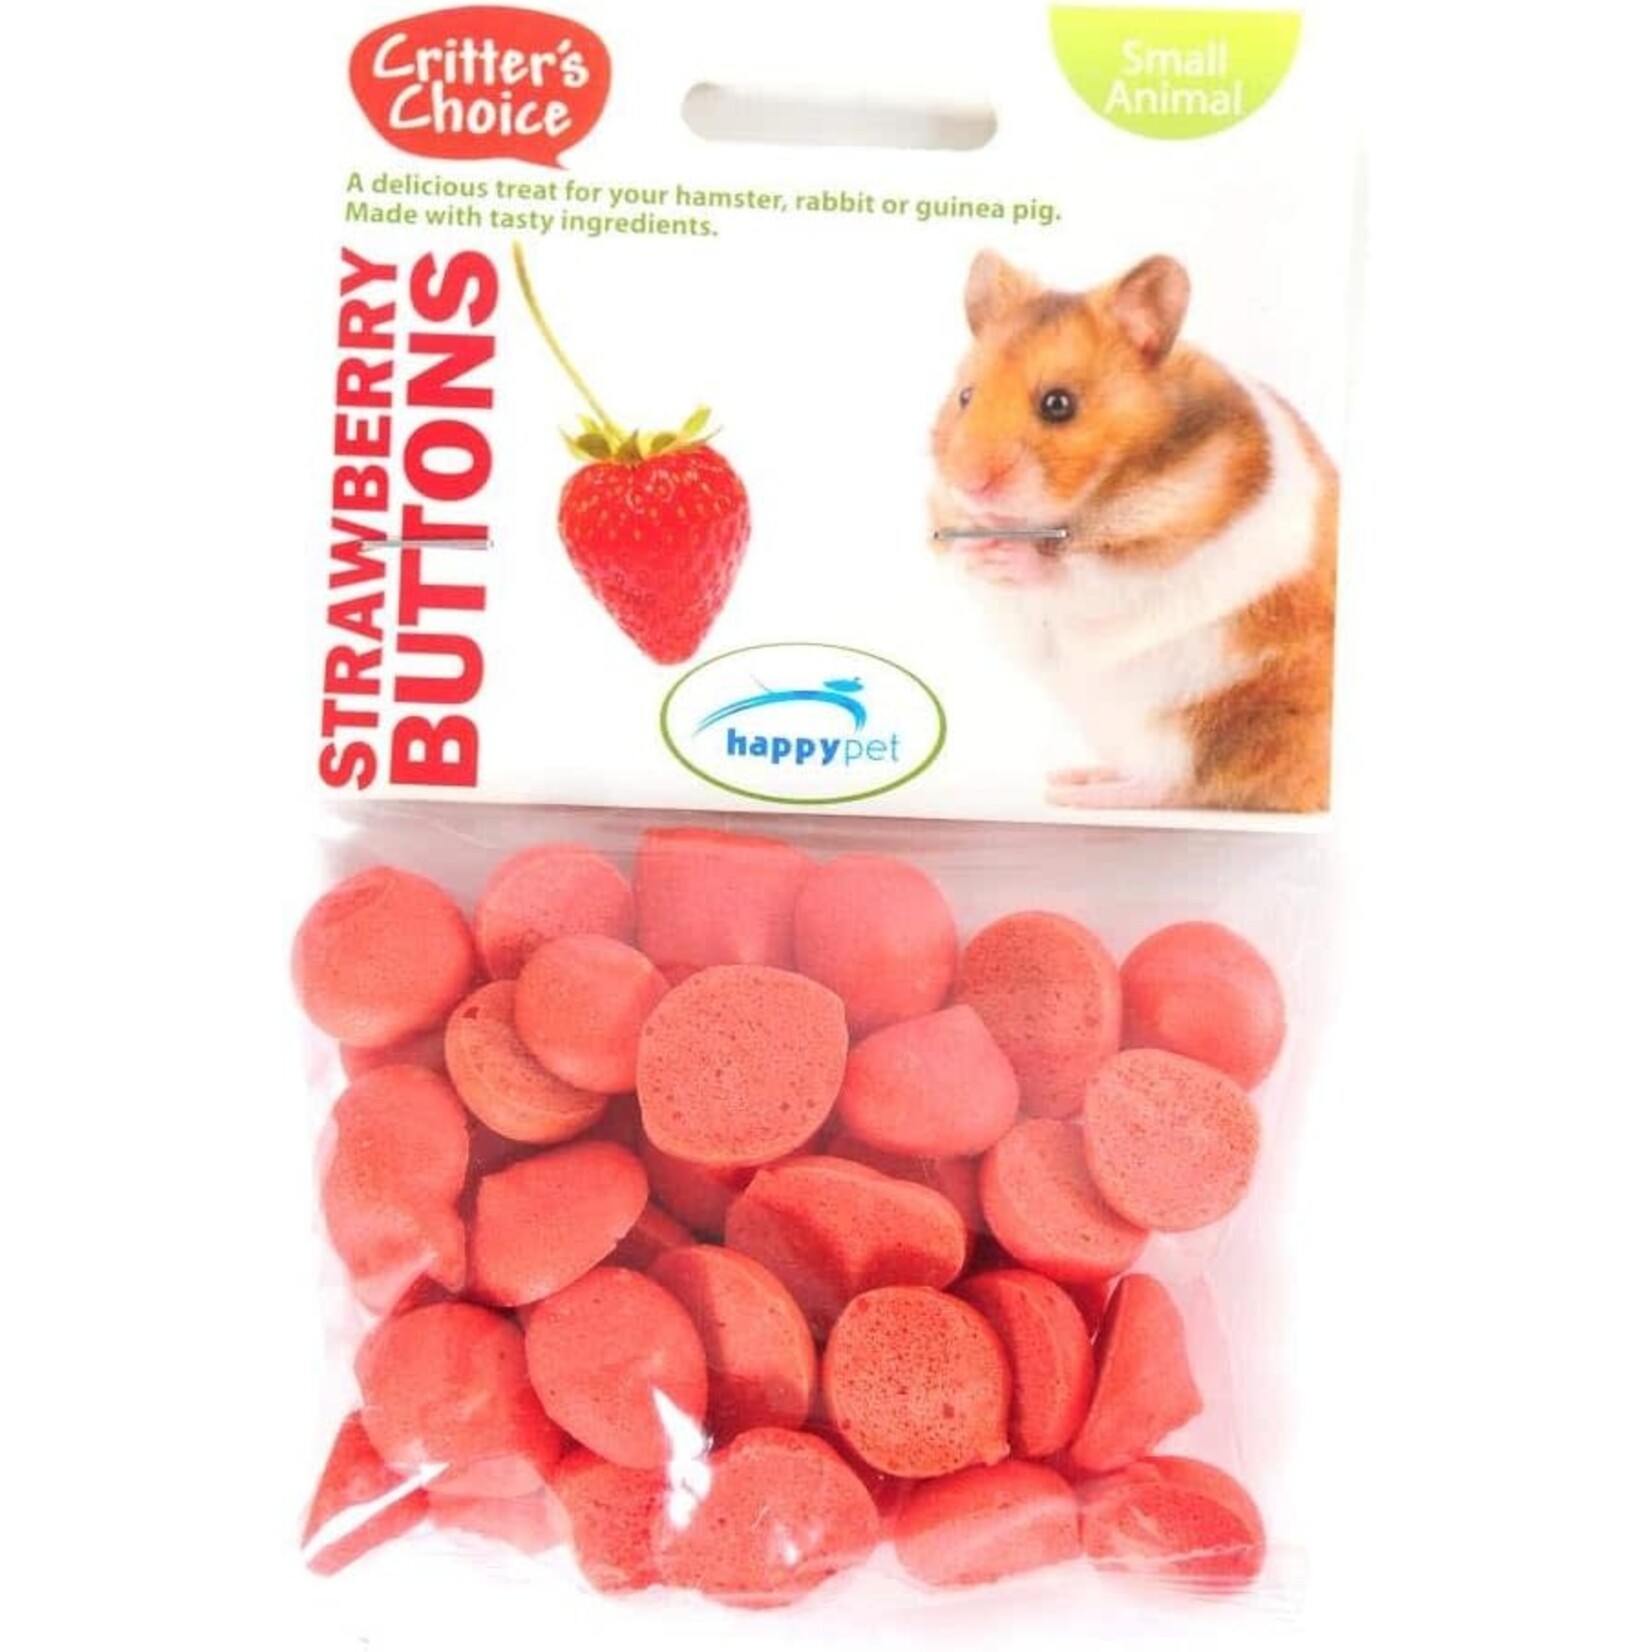 Happy Pet Critter's Choice Small Animal Strawberry Buttons Treats